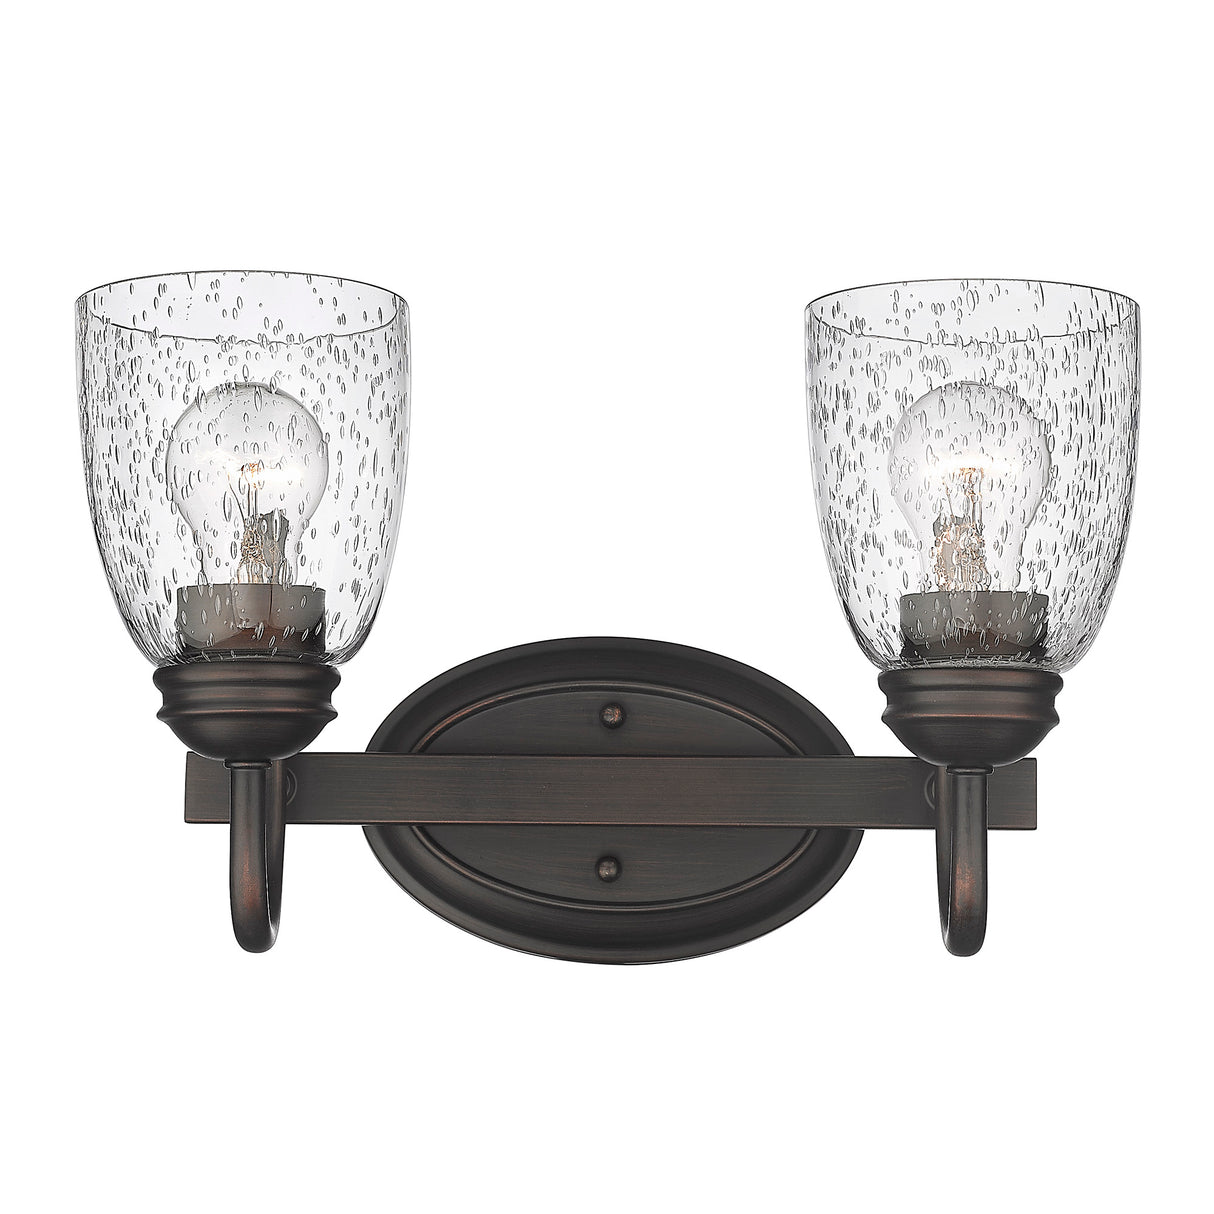 Parrish RBZ 2 Light Bath Vanity in Rubbed Bronze with Seeded Glass Shade